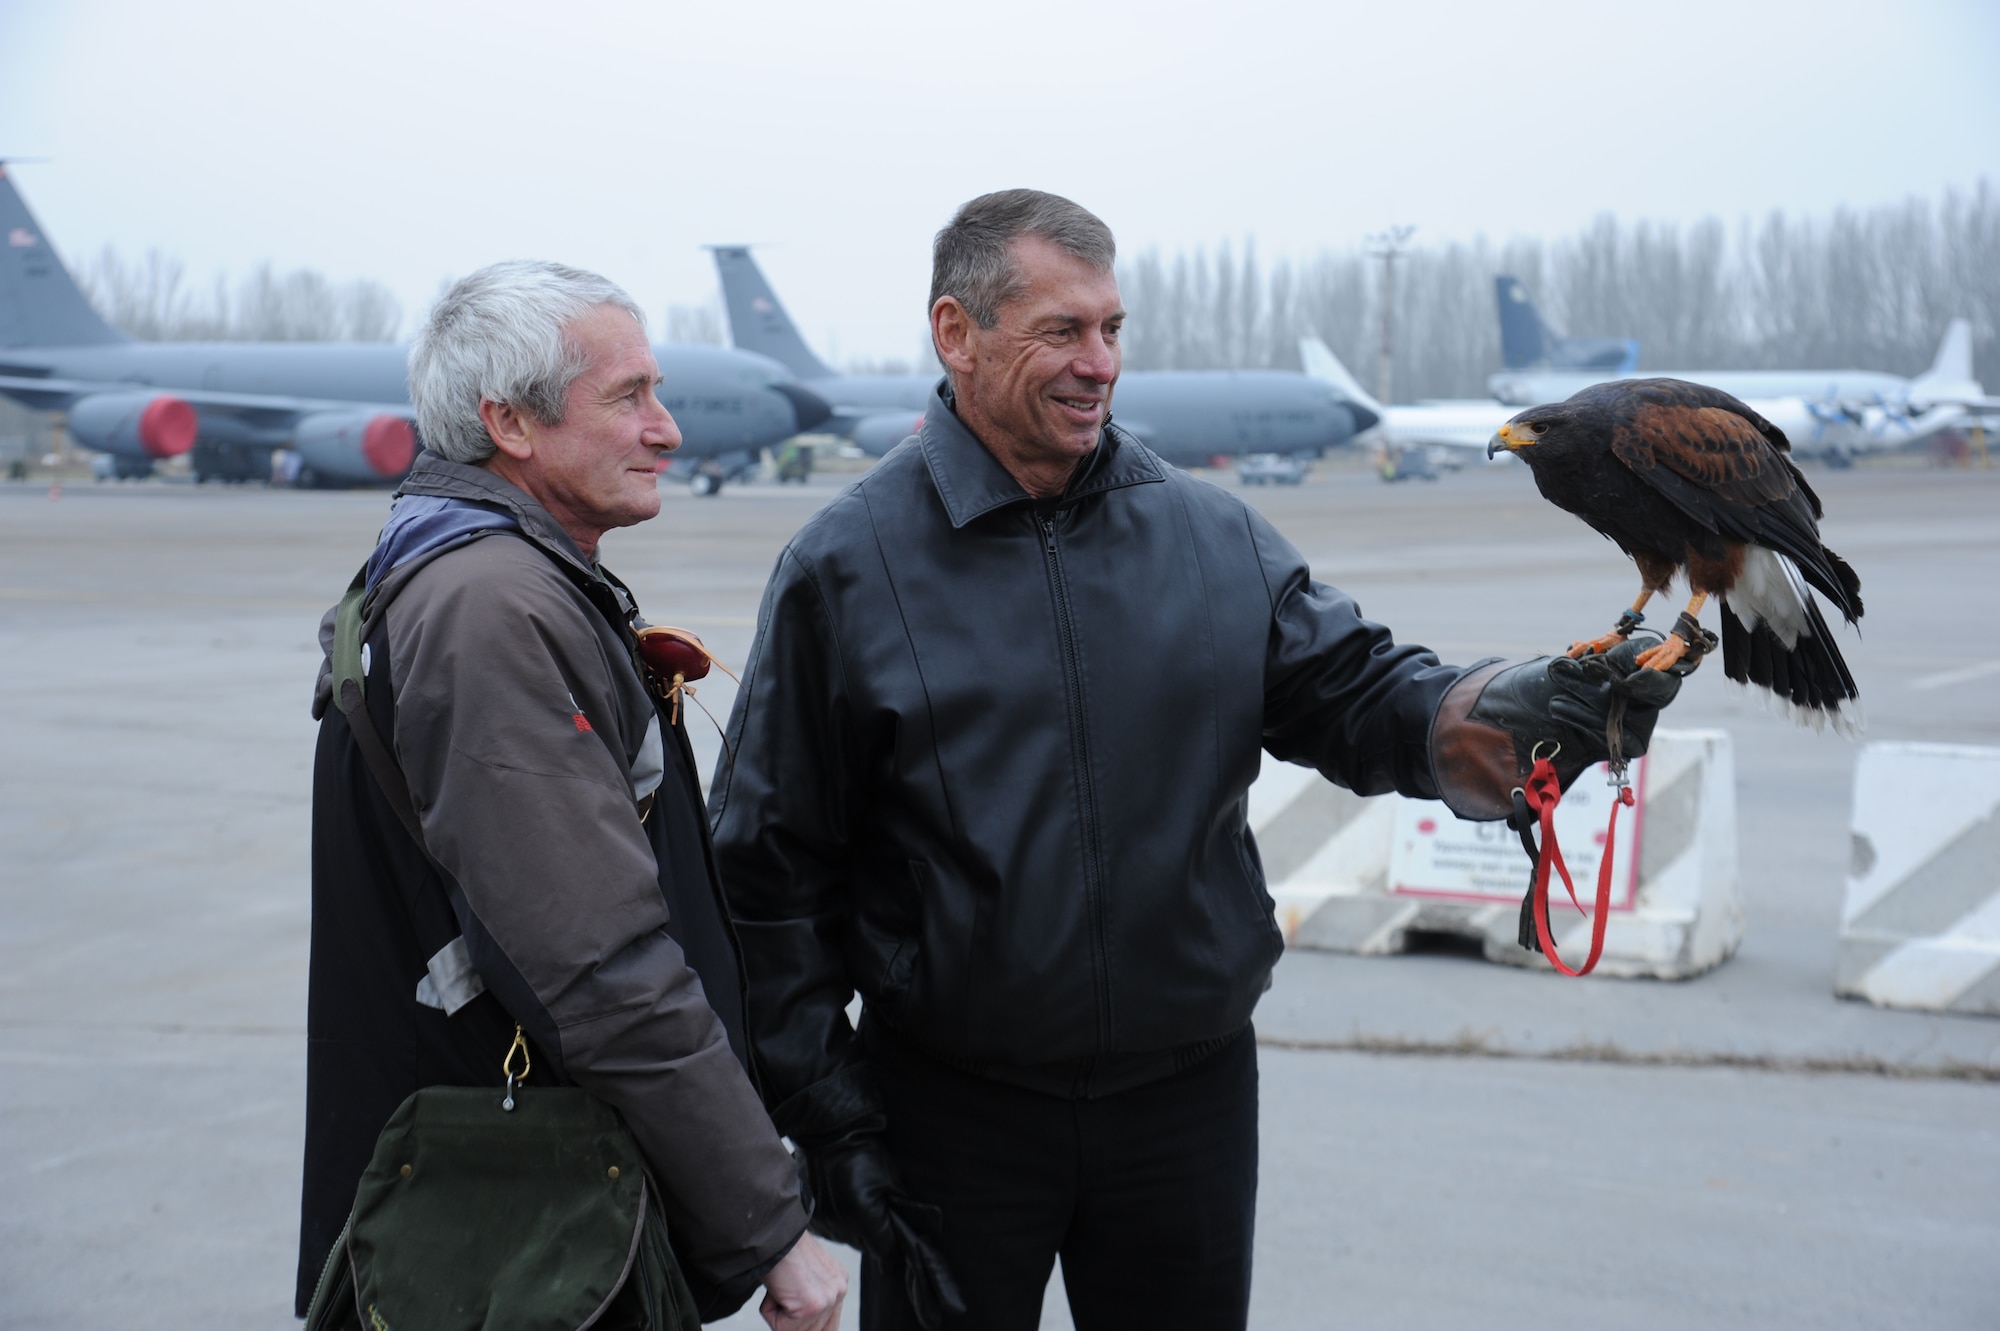 Vince McMahon, World Wrestling Entertainment CEO, holds on to Jet, a hawk, as Steve Farrell, 376th Air Expeditionary Wing flight safety, watches during the Armed Forces Entertainment Handshake Tour visit to the Transit Center at Manas, Kyrgyzstan, Dec. 2. McMahon visited with troops on his first AFE tour to Manas with WWE entertainers Kofi Kingston, and Nikki and Brie Bella. Hawks are used to deter other birds from nesting on the airfield and causing aircraft bird strikes. (U.S. Air Force photo/Tech. Sgt. Hank Hoegen)